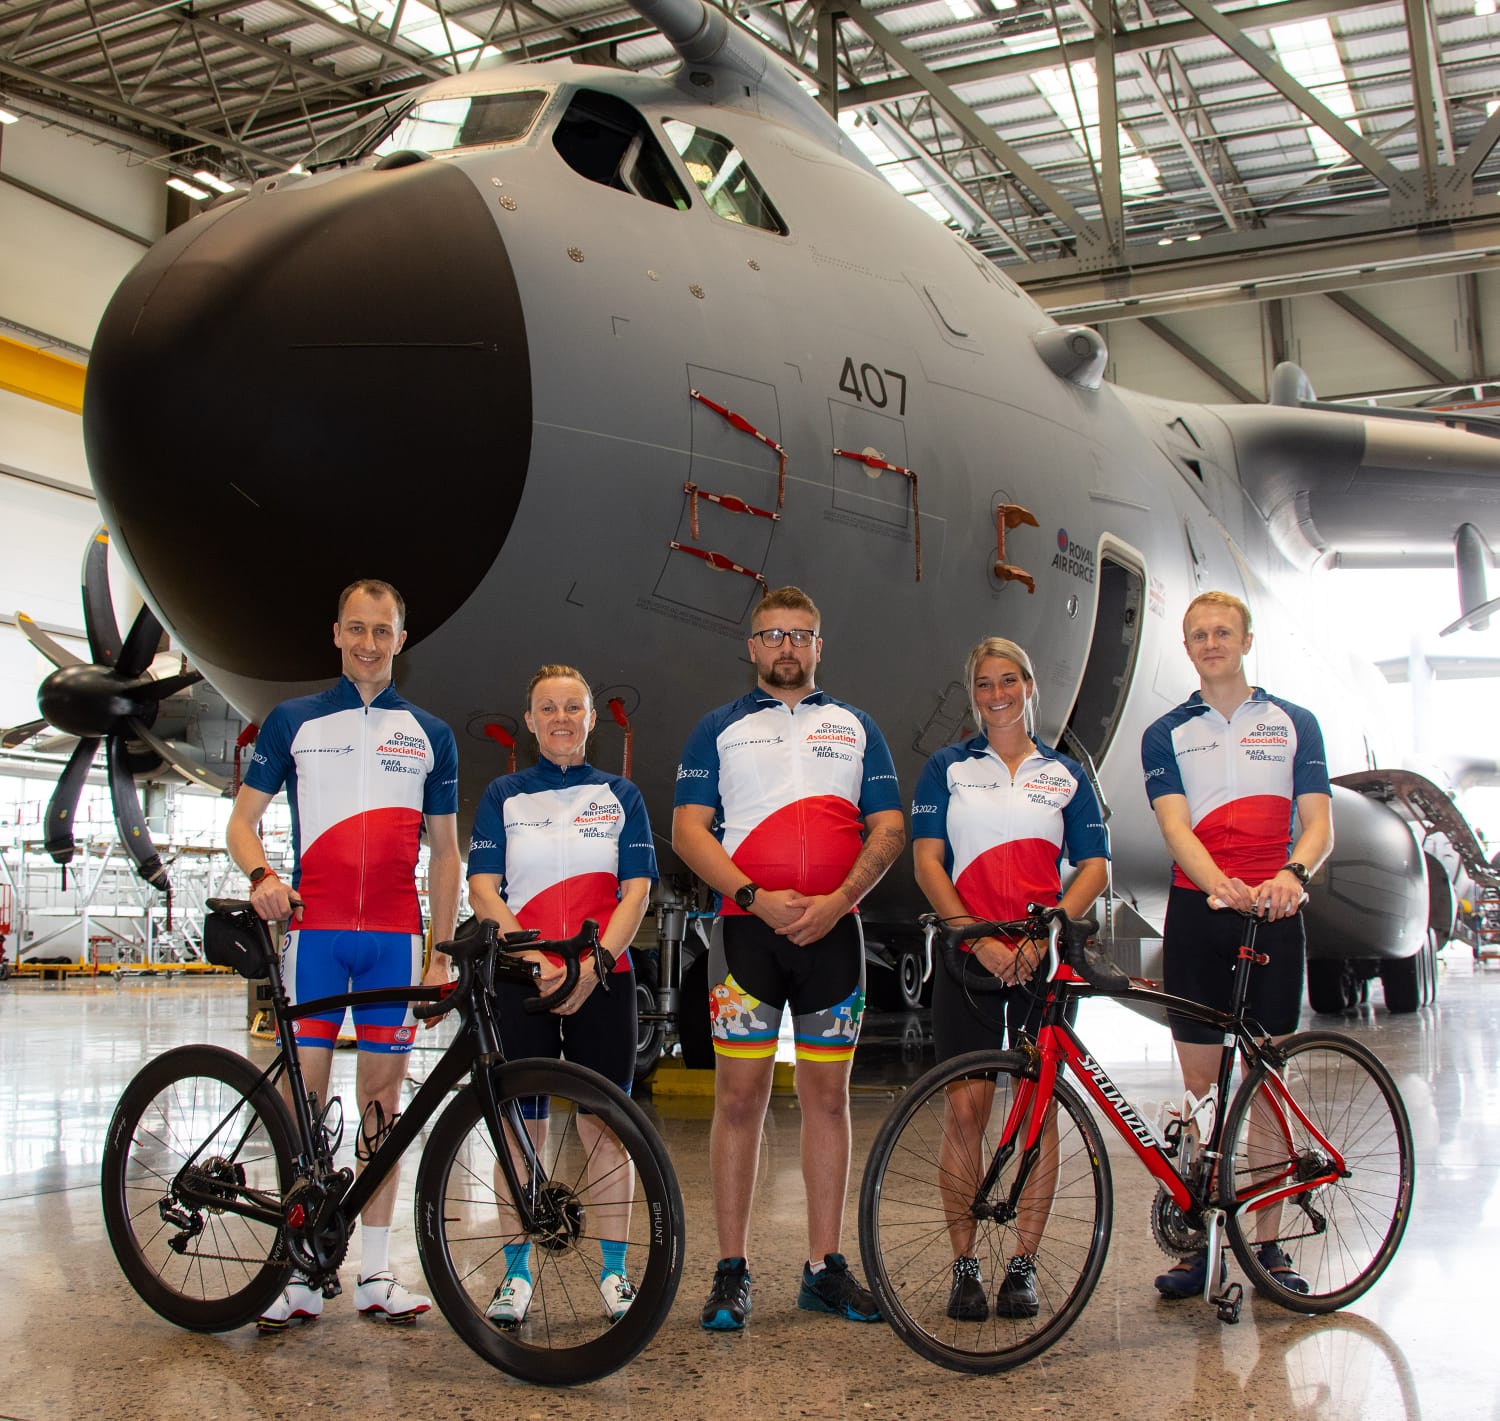 RAF Association members stand with bikes before Atlas aircraft.